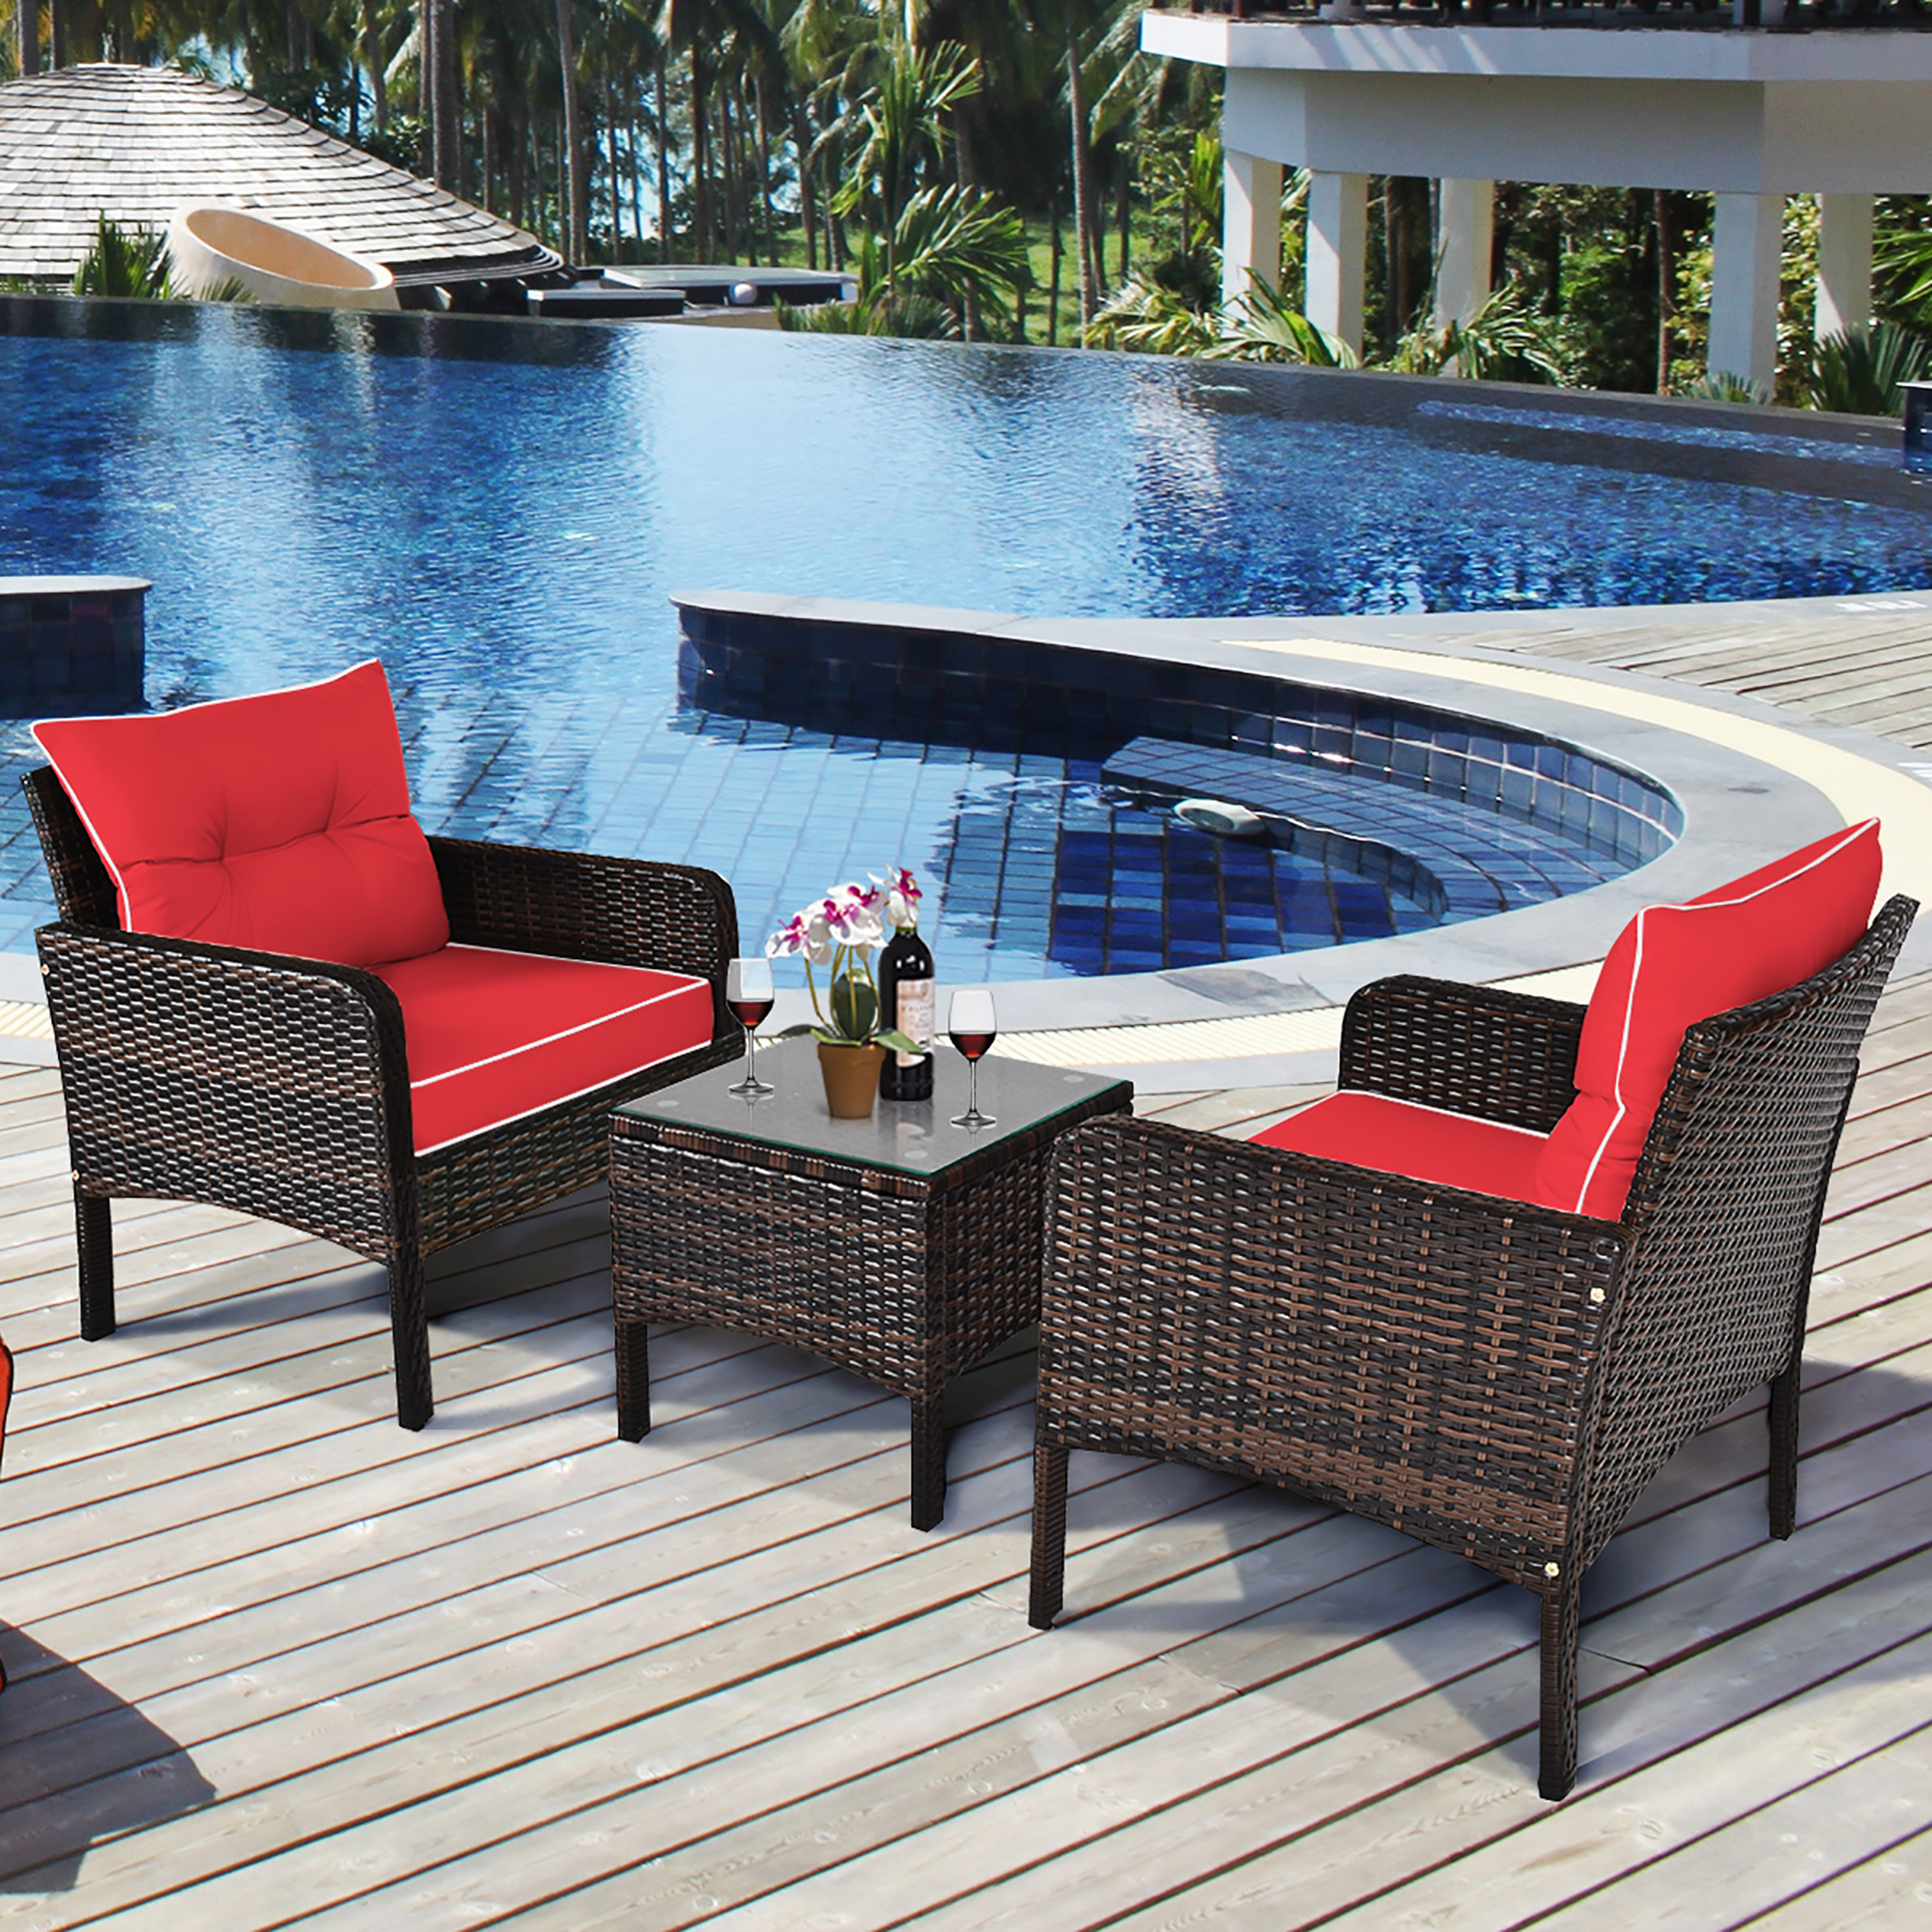 Costway 3PCS Outdoor Rattan Conversation Set Patio Furniture Cushioned Sofa Chair Red - image 4 of 9